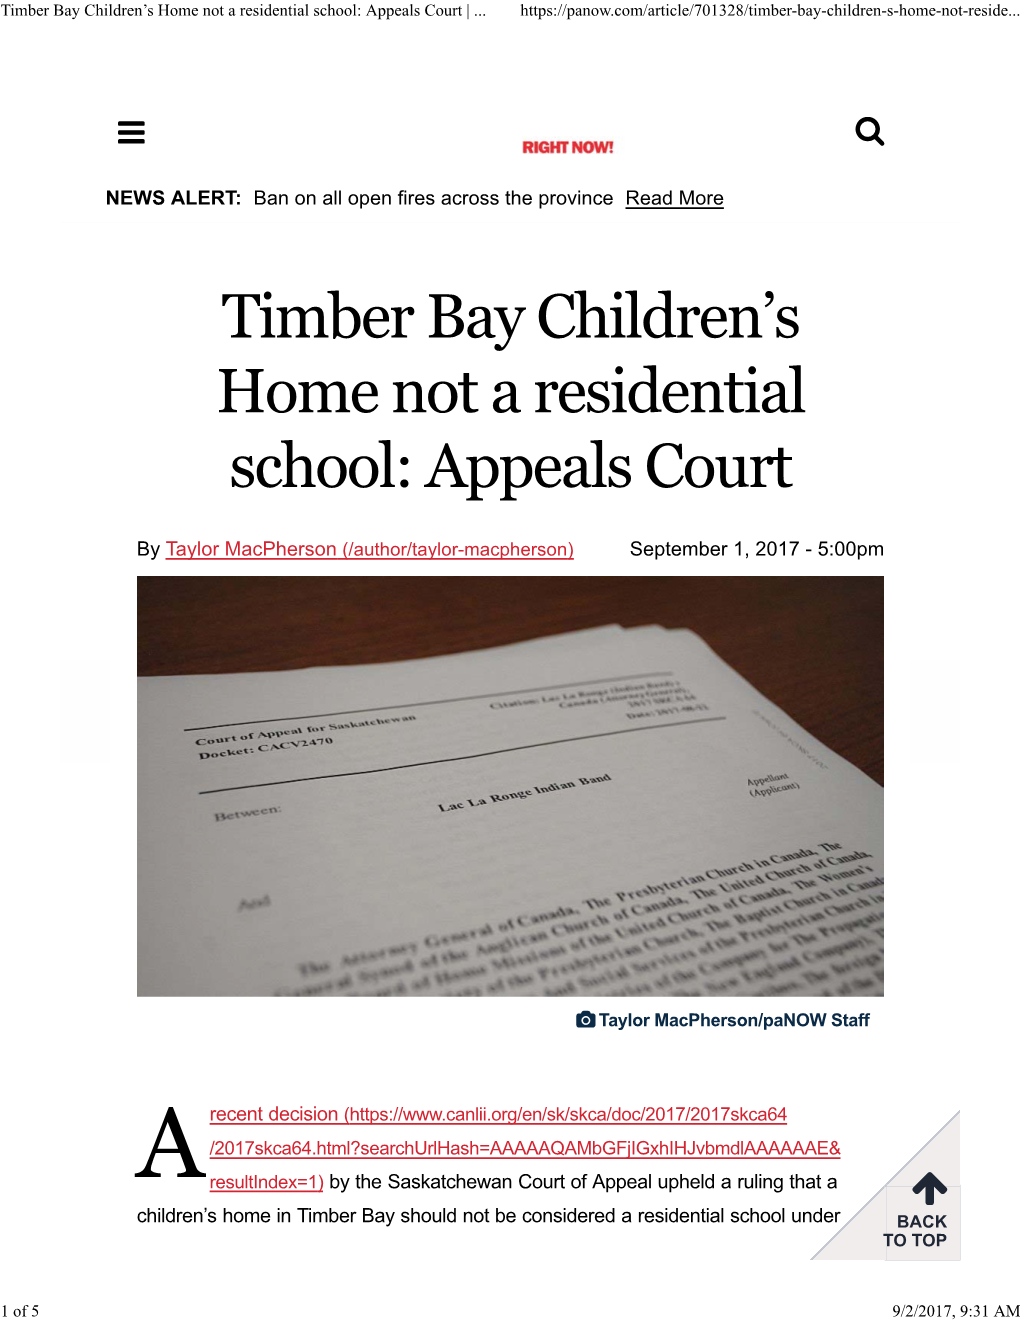 Timber Bay Children's Home Not a Residential School: Appeals Court